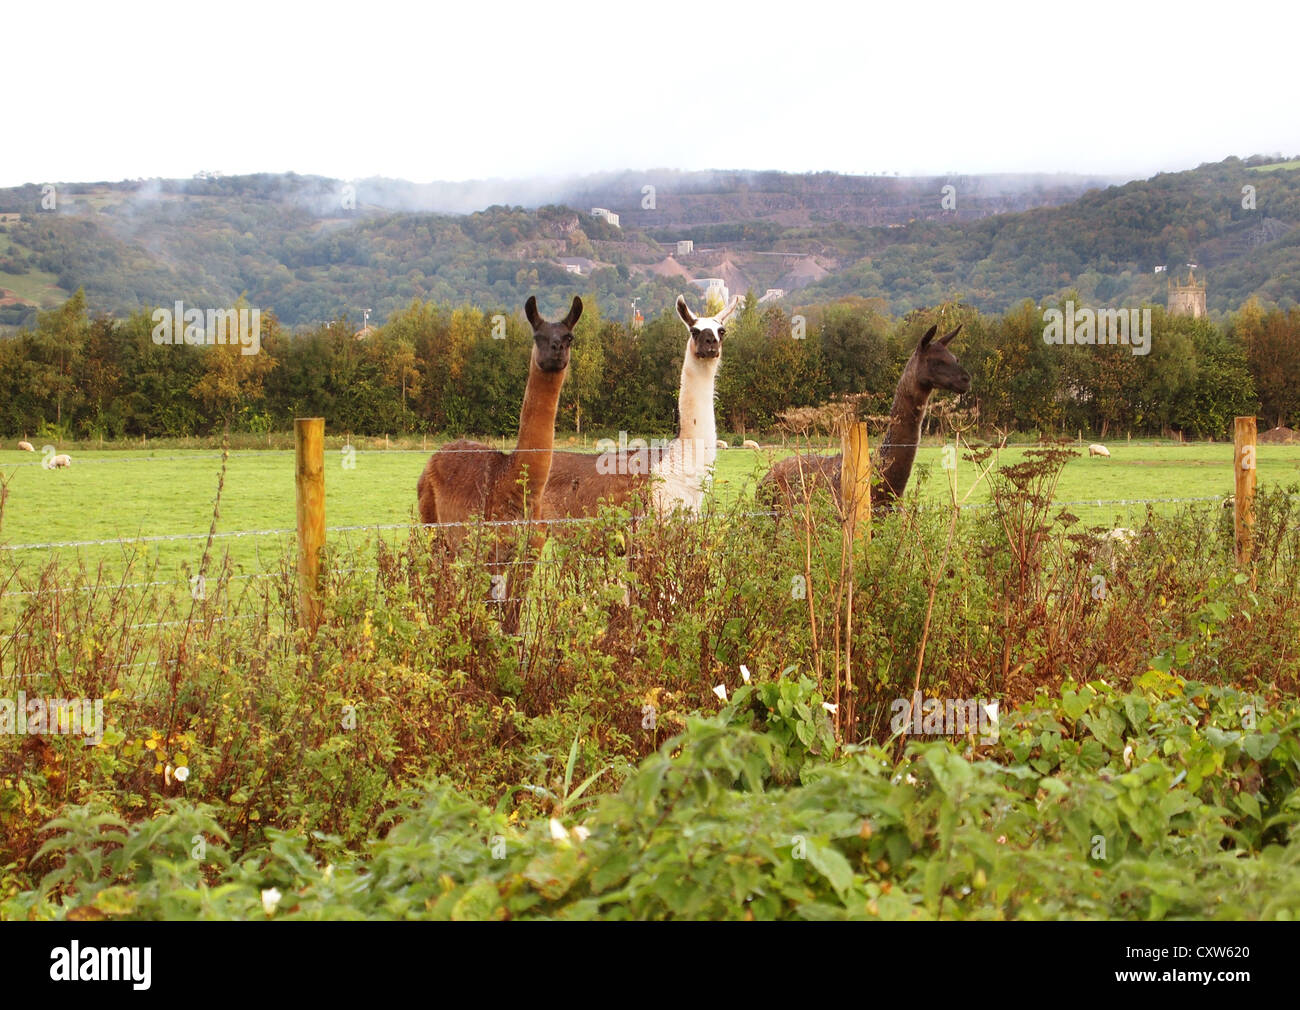 3 Lamas in a field near Cheddar, in rural Somerset, England Stock Photo